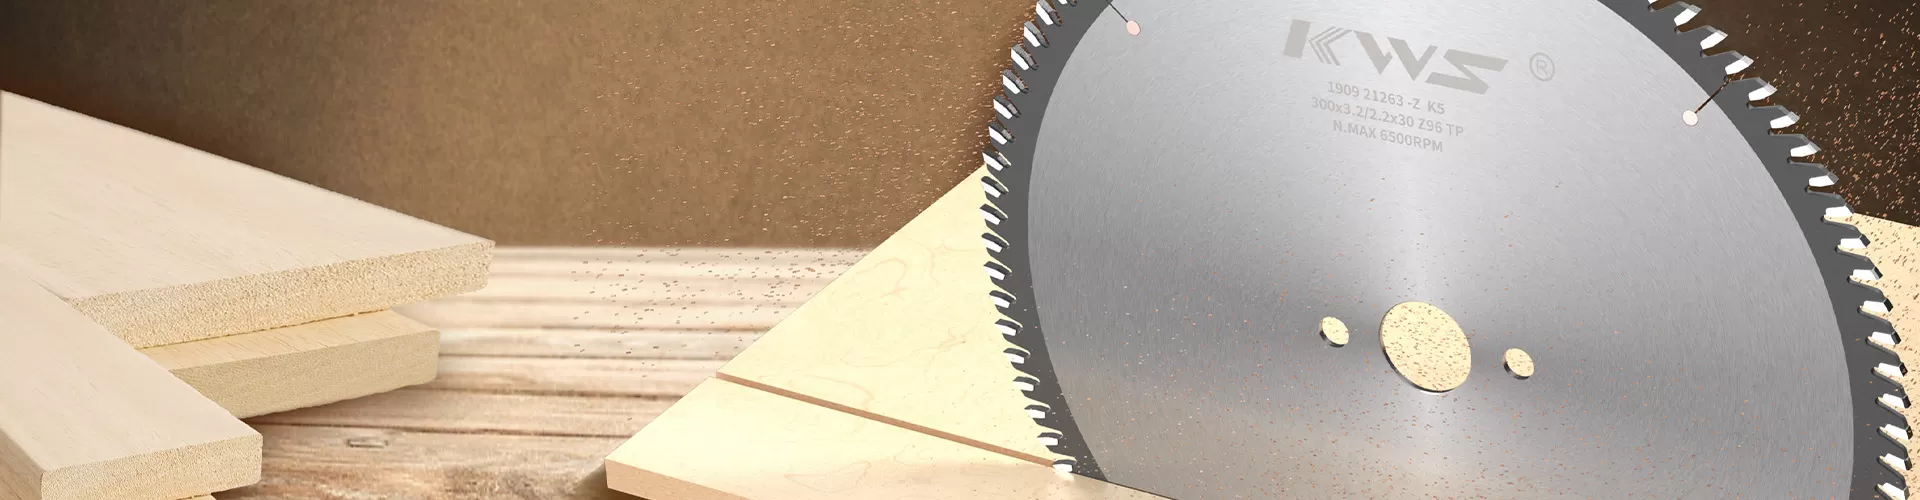 Cold Saw for Pipes Cutting